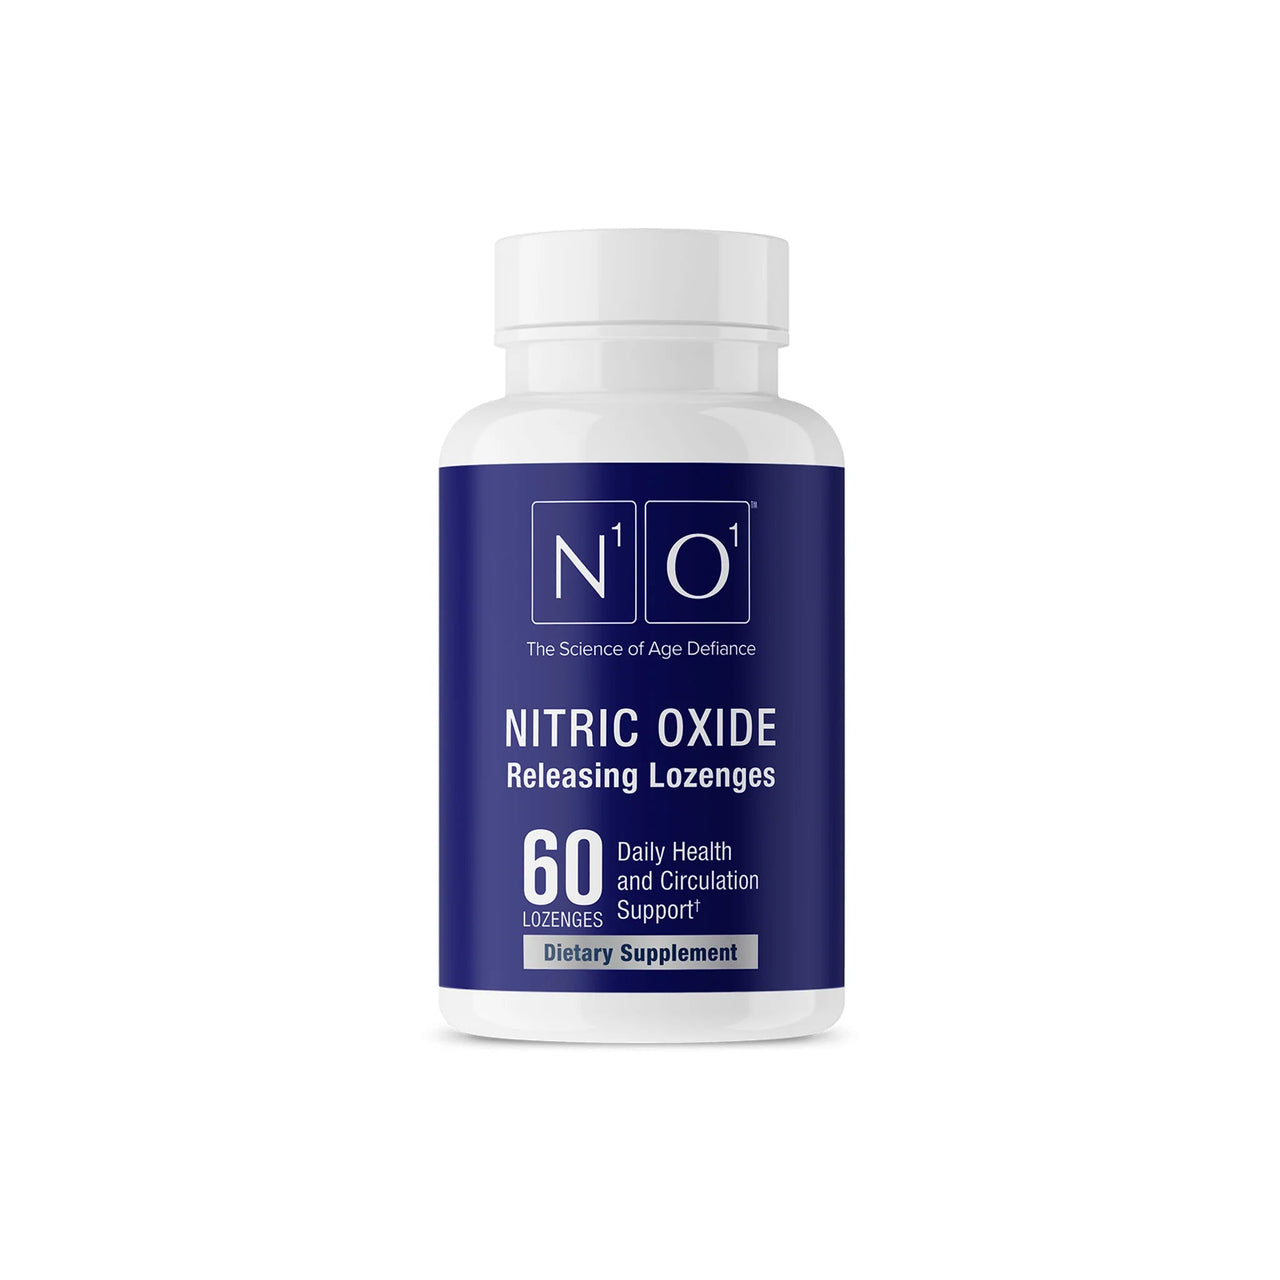 N1o1 Nitric Oxide Lozenges - nitric oxide supplement